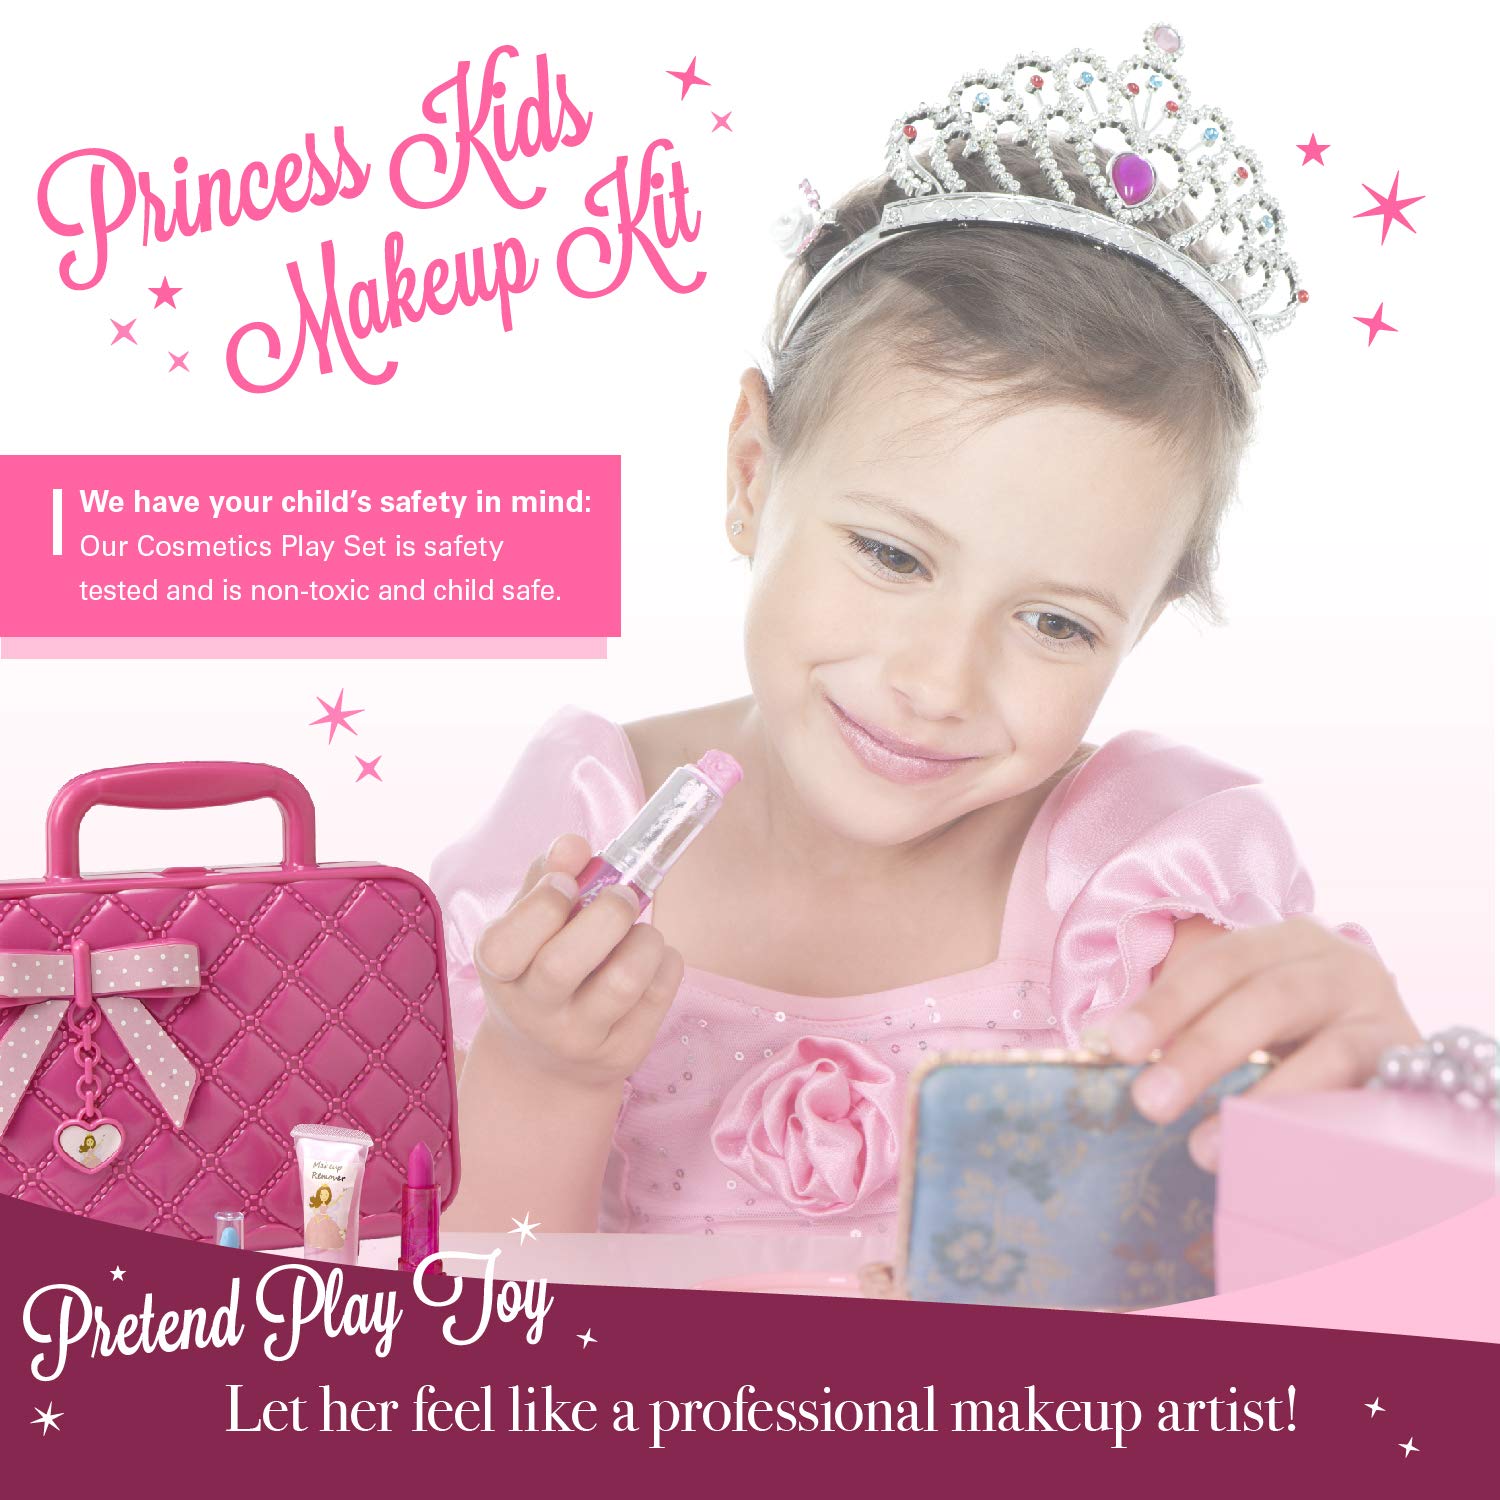 Toysical Kids Makeup Kit for Girl - with Make Up Remover - 30Pc Real Washable, Non Toxic Play Princess Cosmetic Set - Ideal Birthday for Little Girls Ages 3, 4, 5, 6 Year Old Child (Princess)